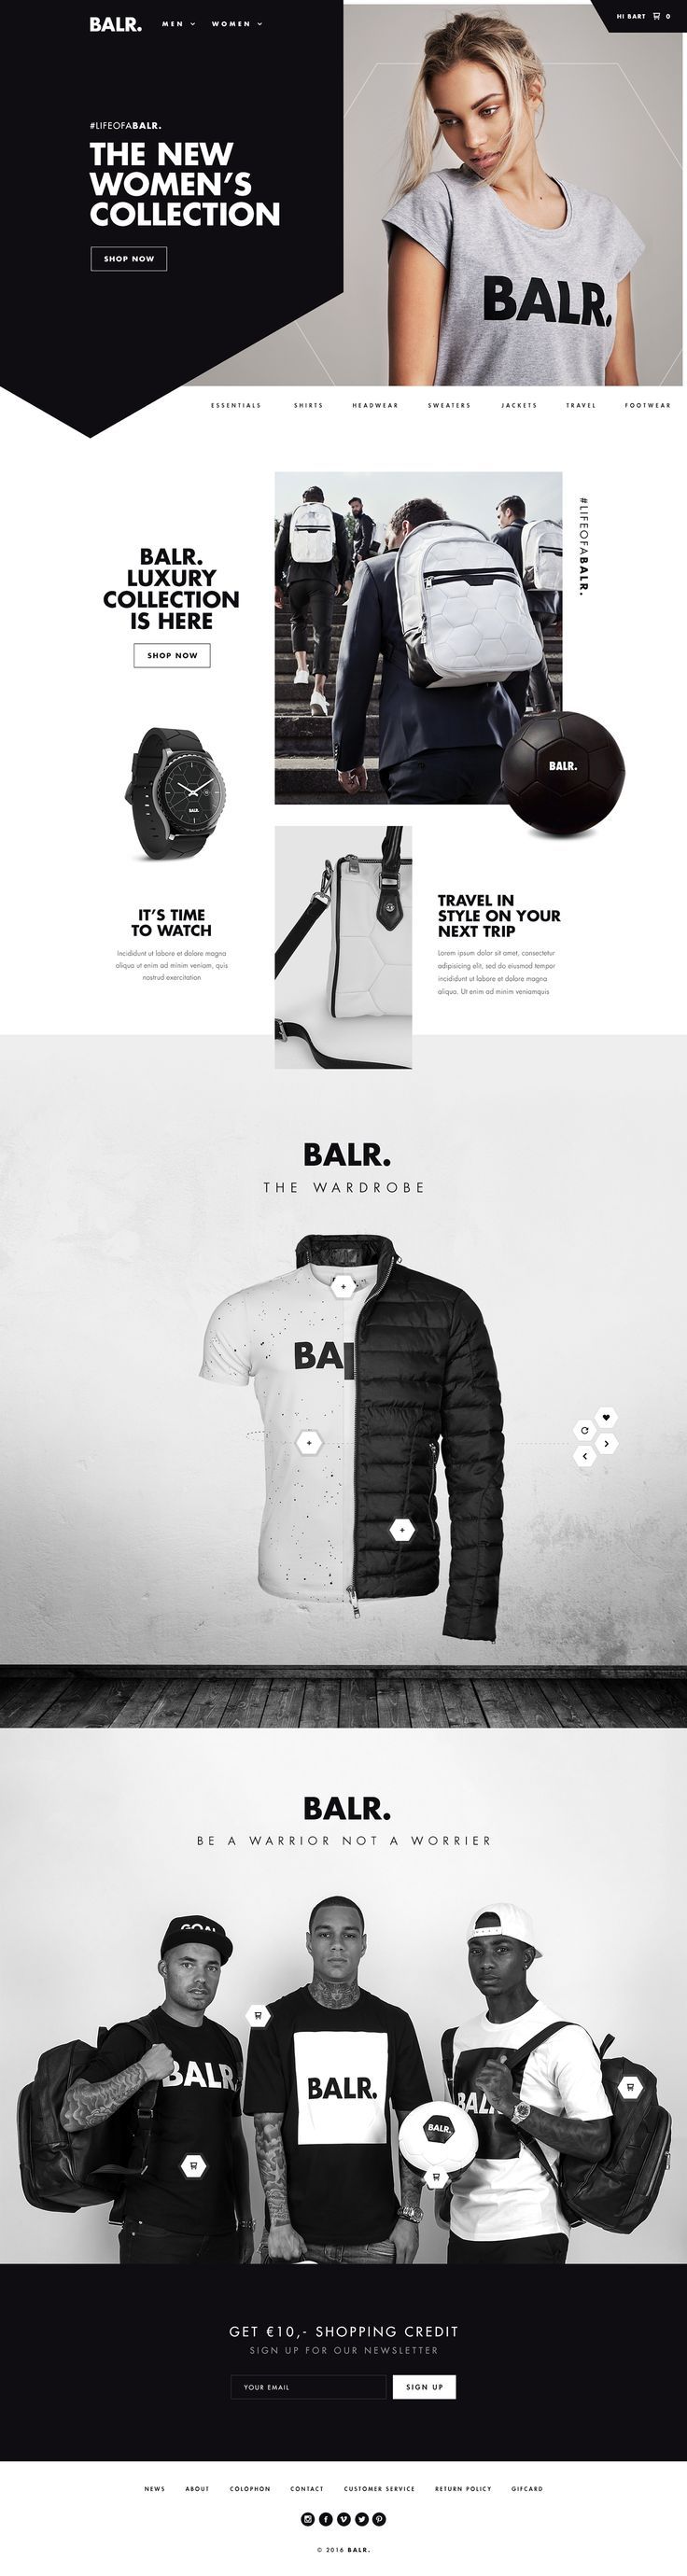 Concept design for Balr.com. To give it a more Balr look and feel.